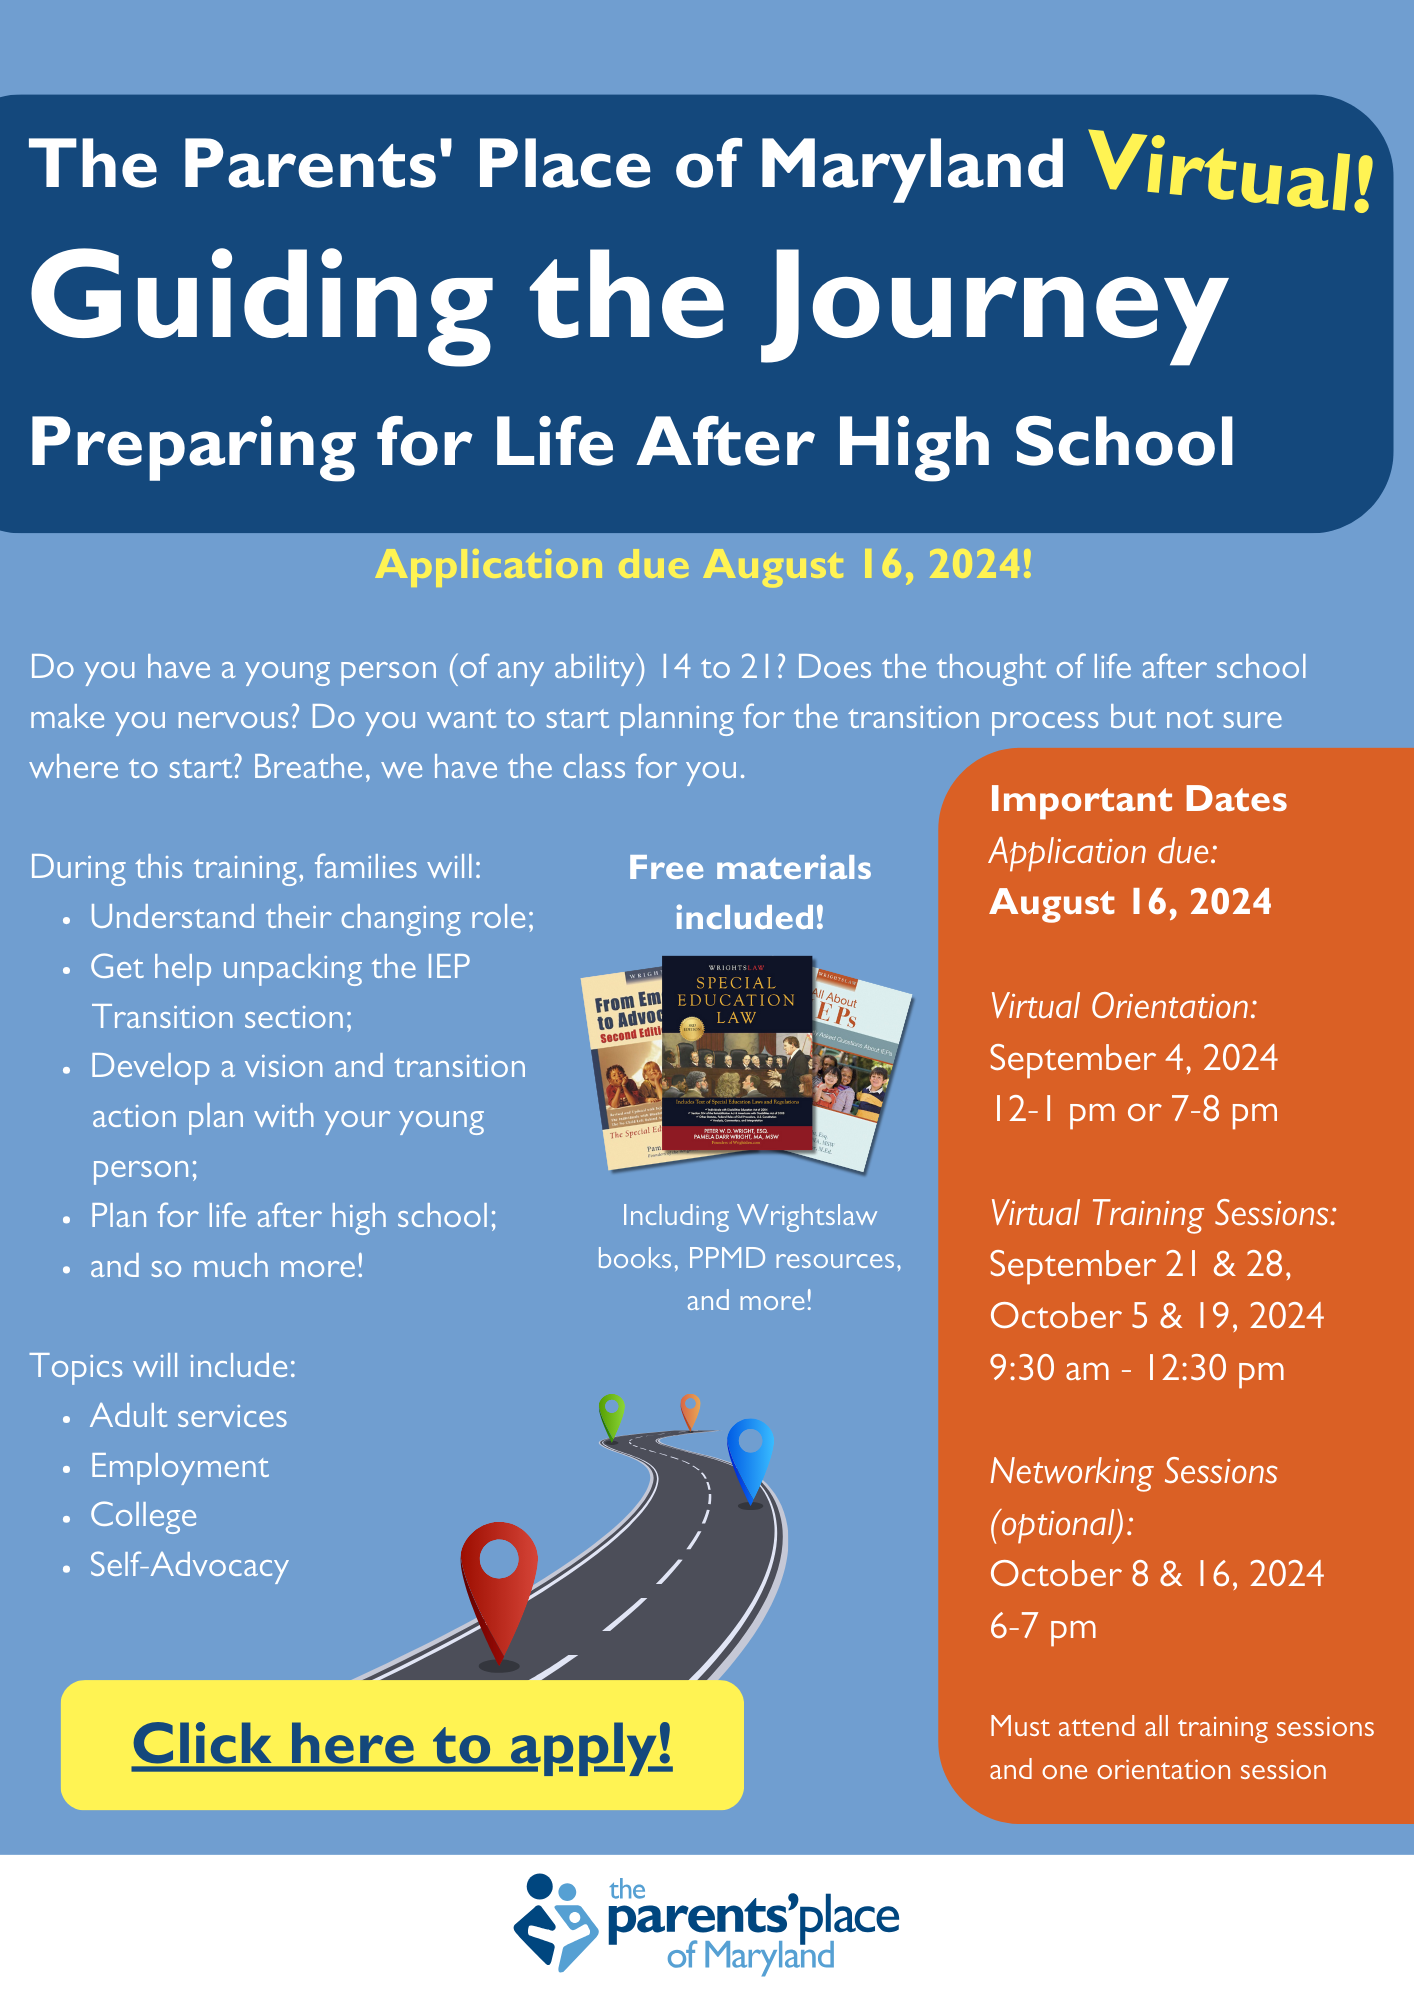 The Parent's Place of Maryland - Virtual - Guiding the Journey: Preparing for Life After High School. Application due August 16, 2024! Do you have a young person (of any ability) 14 to 21? Does the thought of life after school make you nervous? Do you want to start planning for the transition process but not sure where to start? Breathe. We have the class for you. During this training, families will:
Understand their changing role
Get help unpacking the IEP transition section
Develop a vision and transition action plan with your young person
Plan for life after high school
And so much more!
Topics will include adult services, employment, college, self advocacy
Free materials included, including Wrightslaw books, PPMD resources and more

Important dates: 
Application due August 16, 2024
Virtual orientation: September 4, 2024 12-1pm or 7-8pm
Virtual Training Sessions: September 21 & 28, October 5 & 19, 2024 9:30am-12:30pm
Networking Sessions (optional): October 8 & 16, 2024 6-7pm
Must attend all training sessions and one orientation session